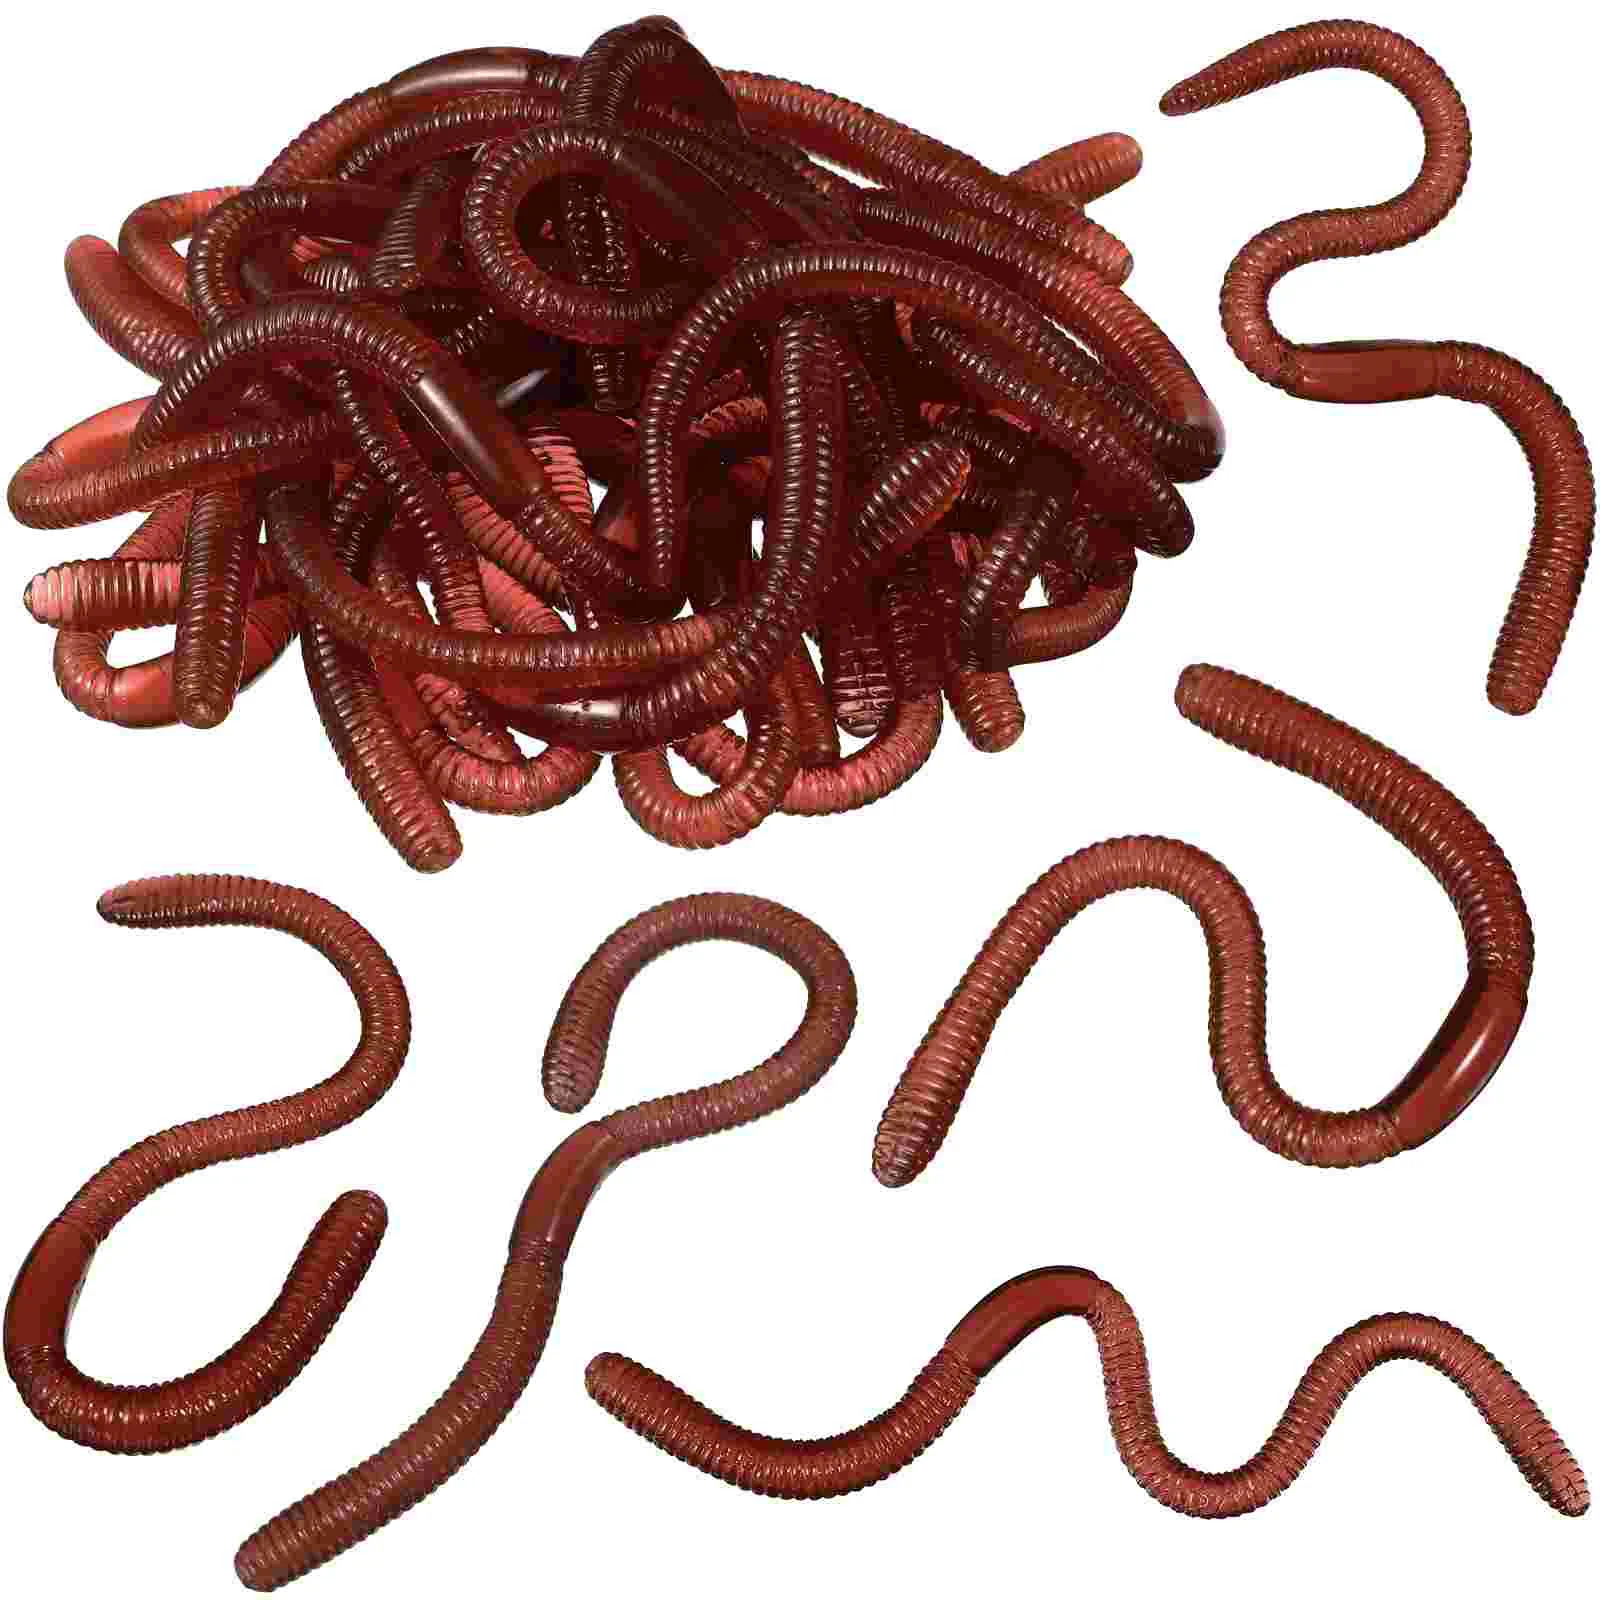 

Toys Earthworm Lure Earthworms Realistic Gifts Scare Gag Stretchy People Joke Pranks Kids April Fools Jokes Or Treat Trick Prank